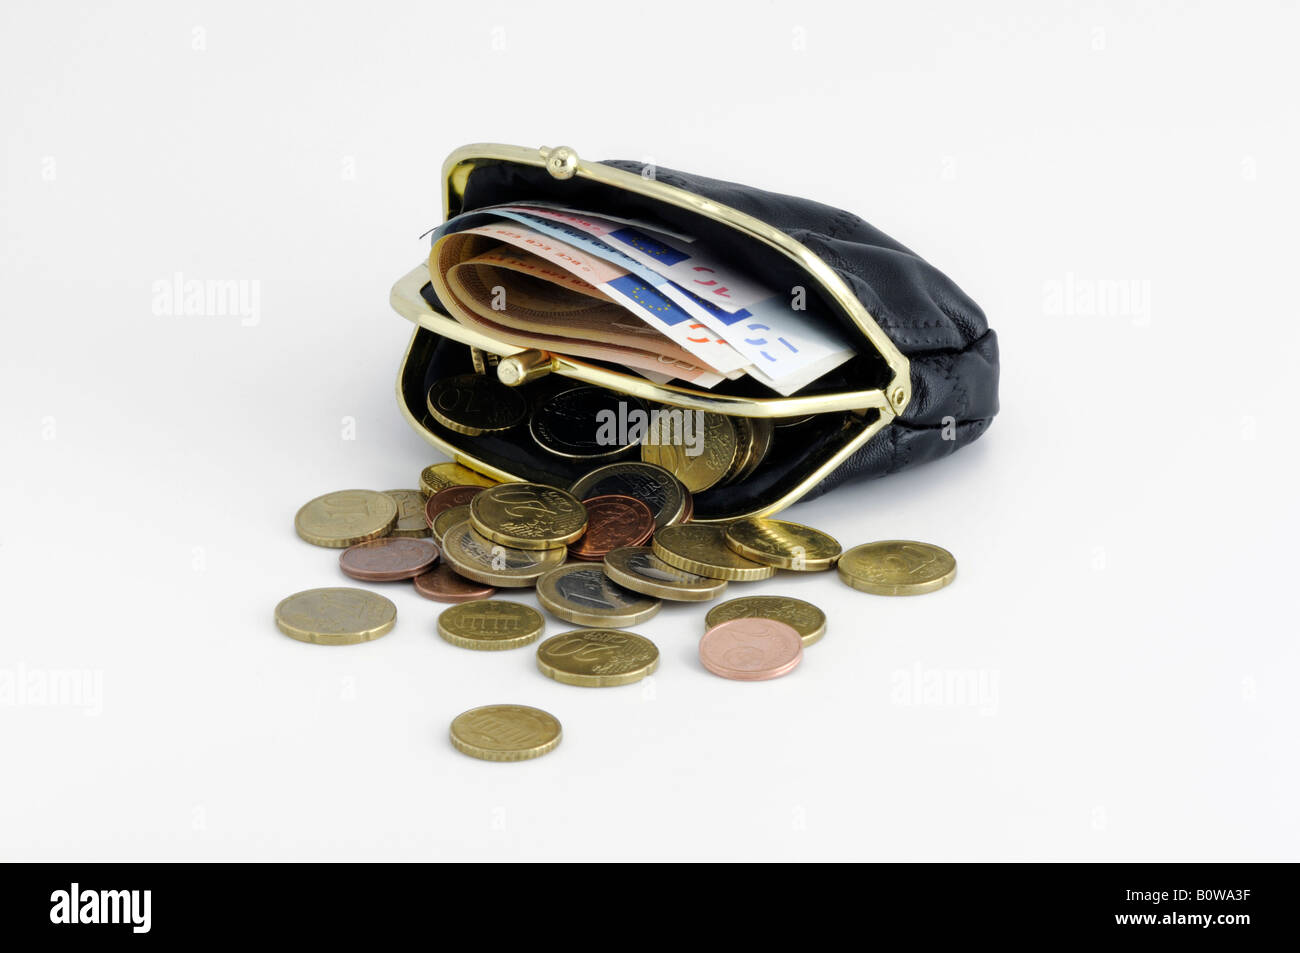 Red change purse filled with Euro coins and bills Stock Photo